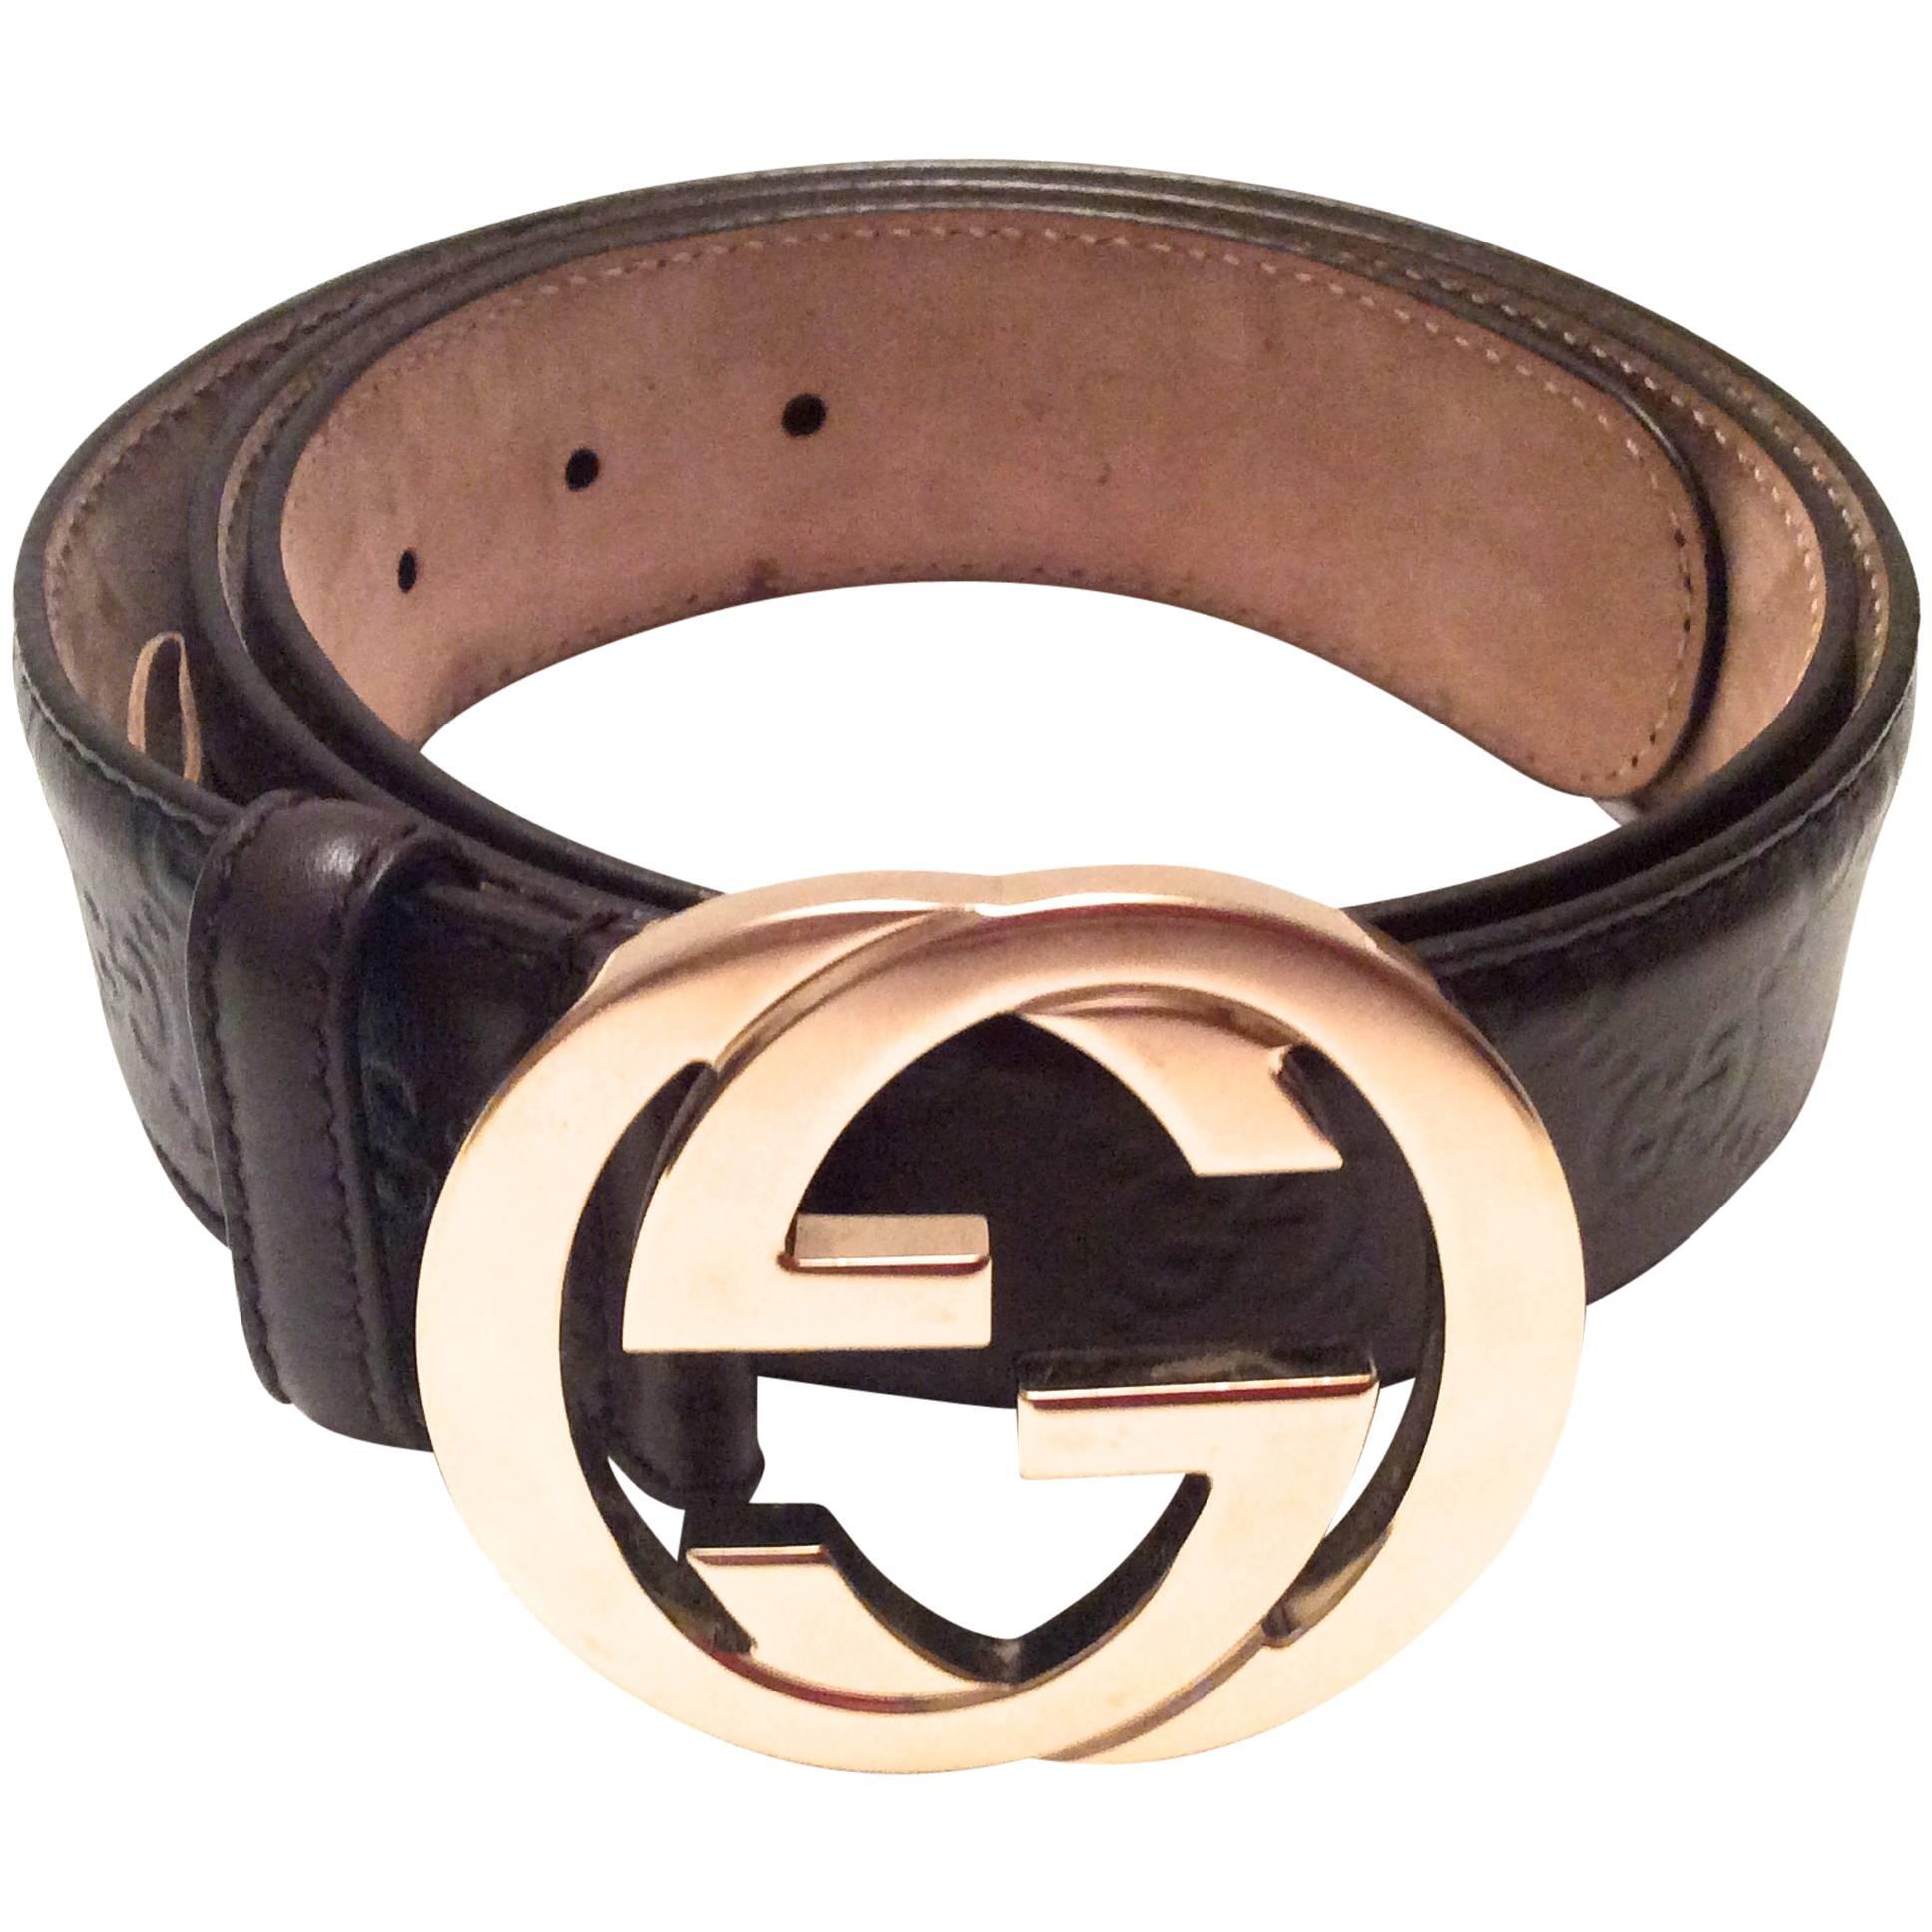 Men's Gucci Brown Leather Belt - Like New